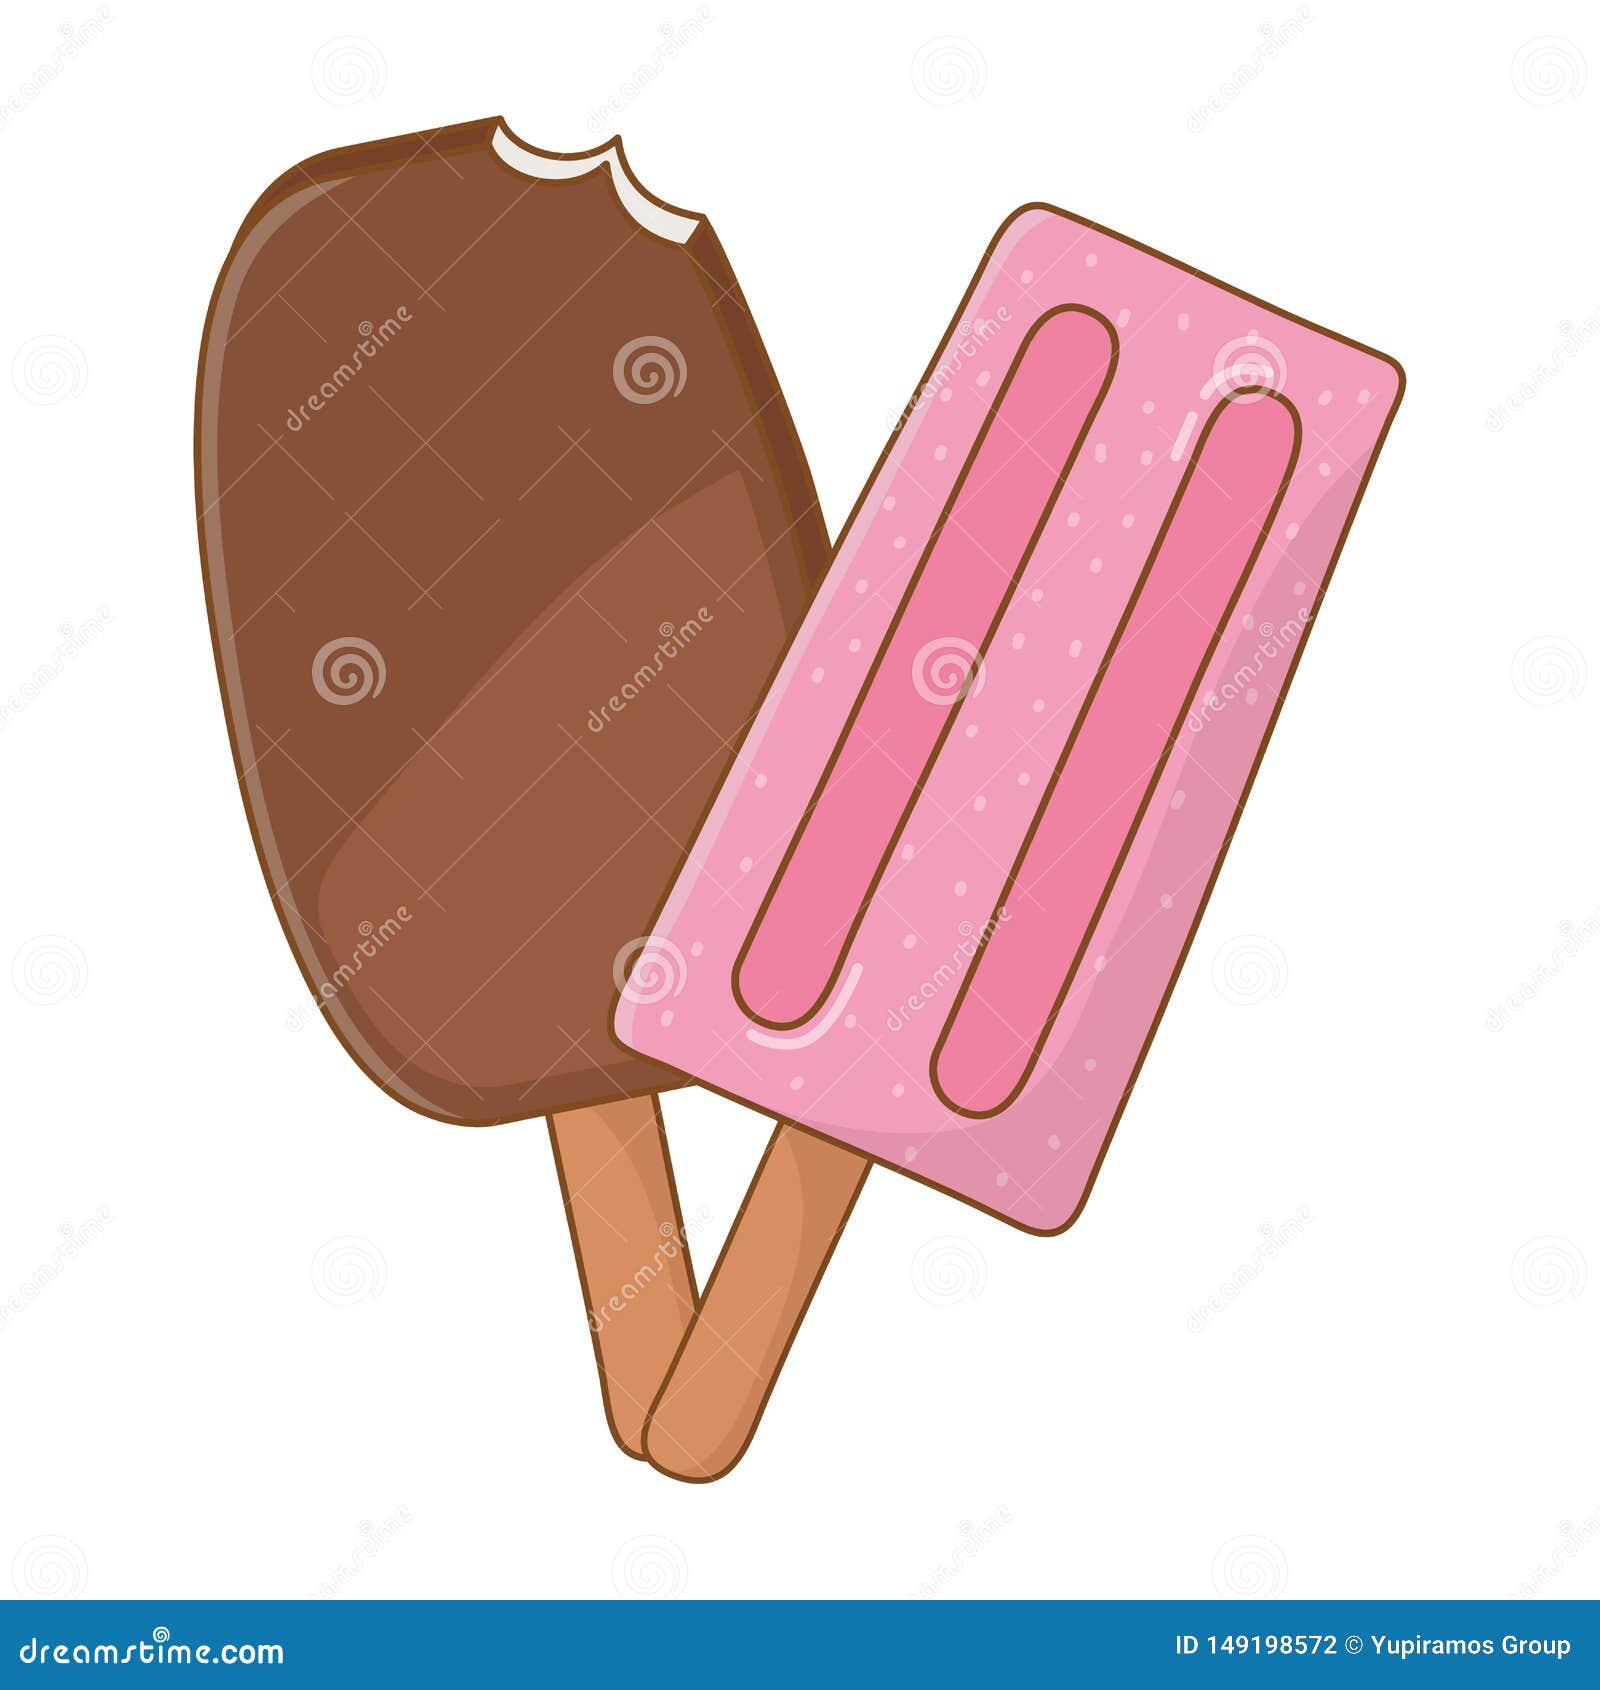 Summer Popsicle and Ice Cream Cartoon Stock Vector - Illustration of fruit,  homemade: 149198572